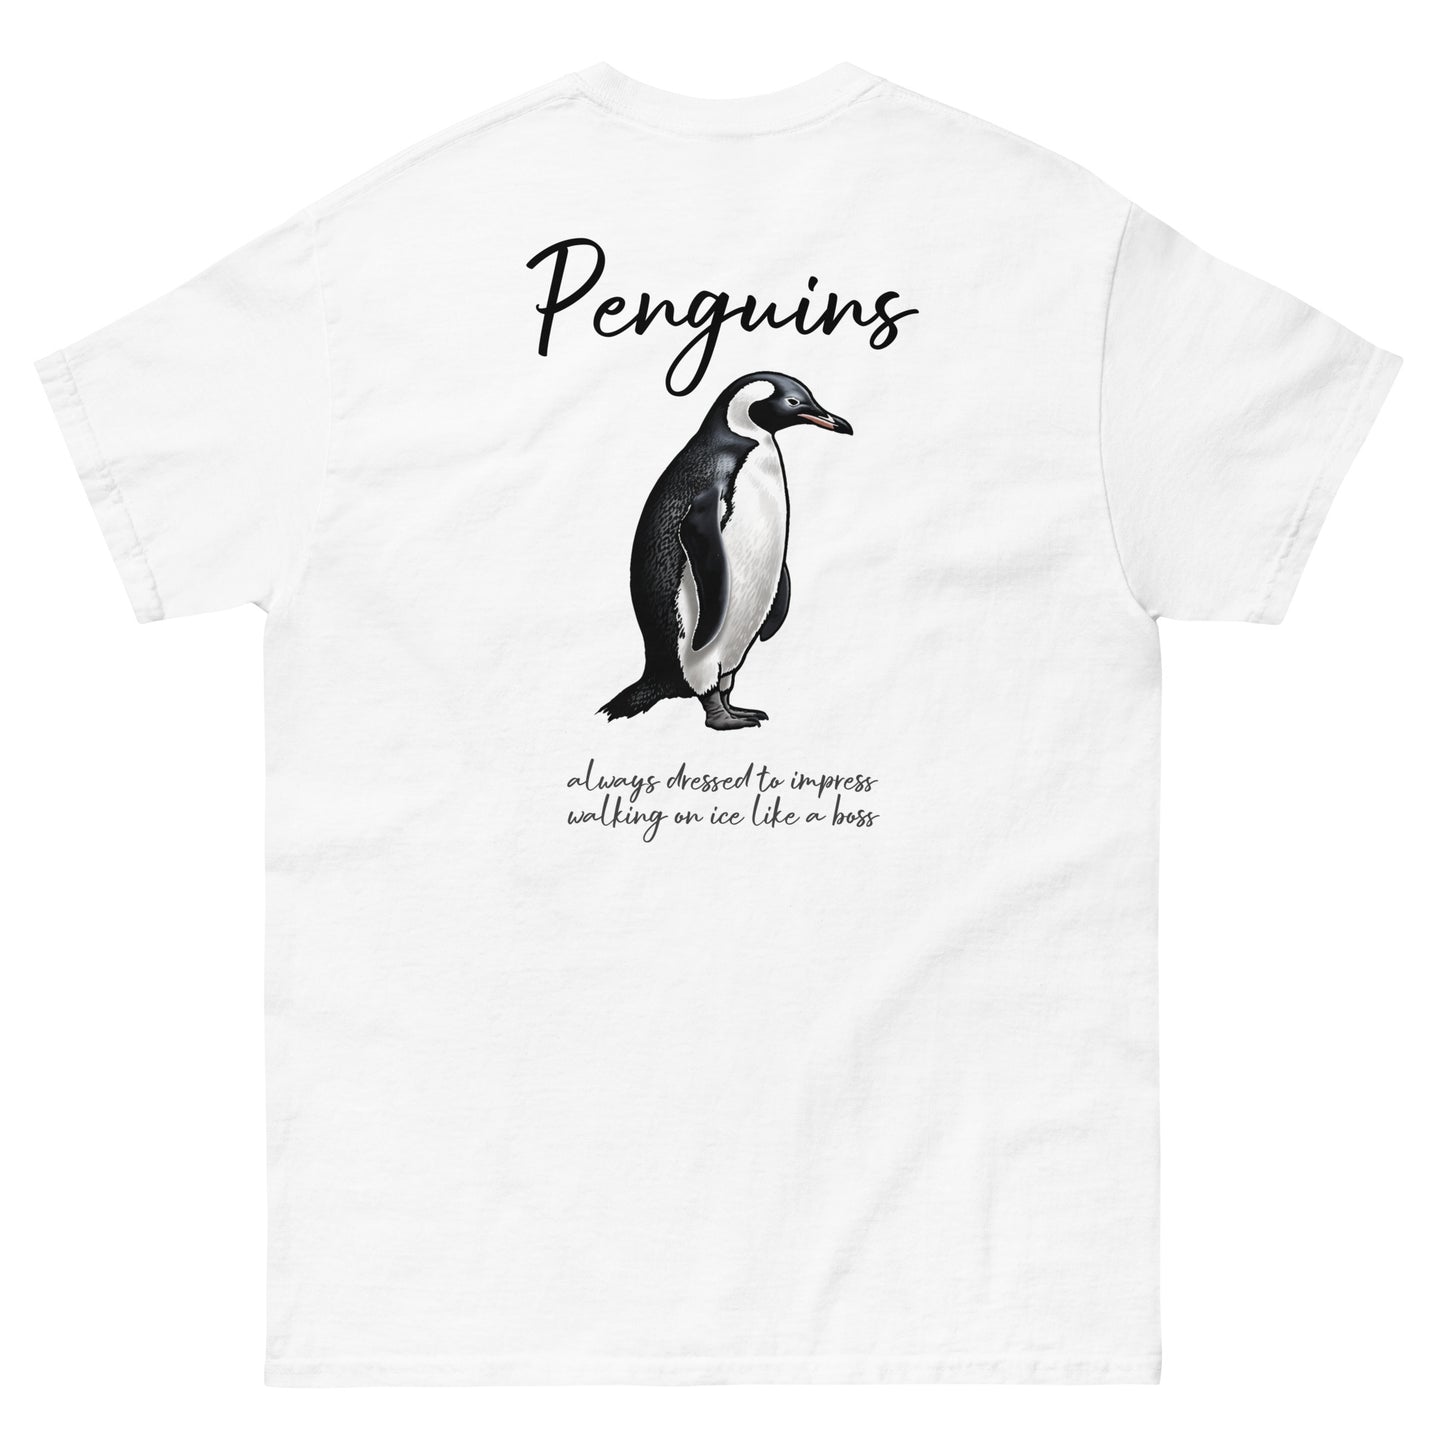 White High Quality Tee - Front Design with a Penguin on left chest - Back Design with a Penguin and a Phrase "Penguins:always dressed to impress, walking on ice like a boss" print